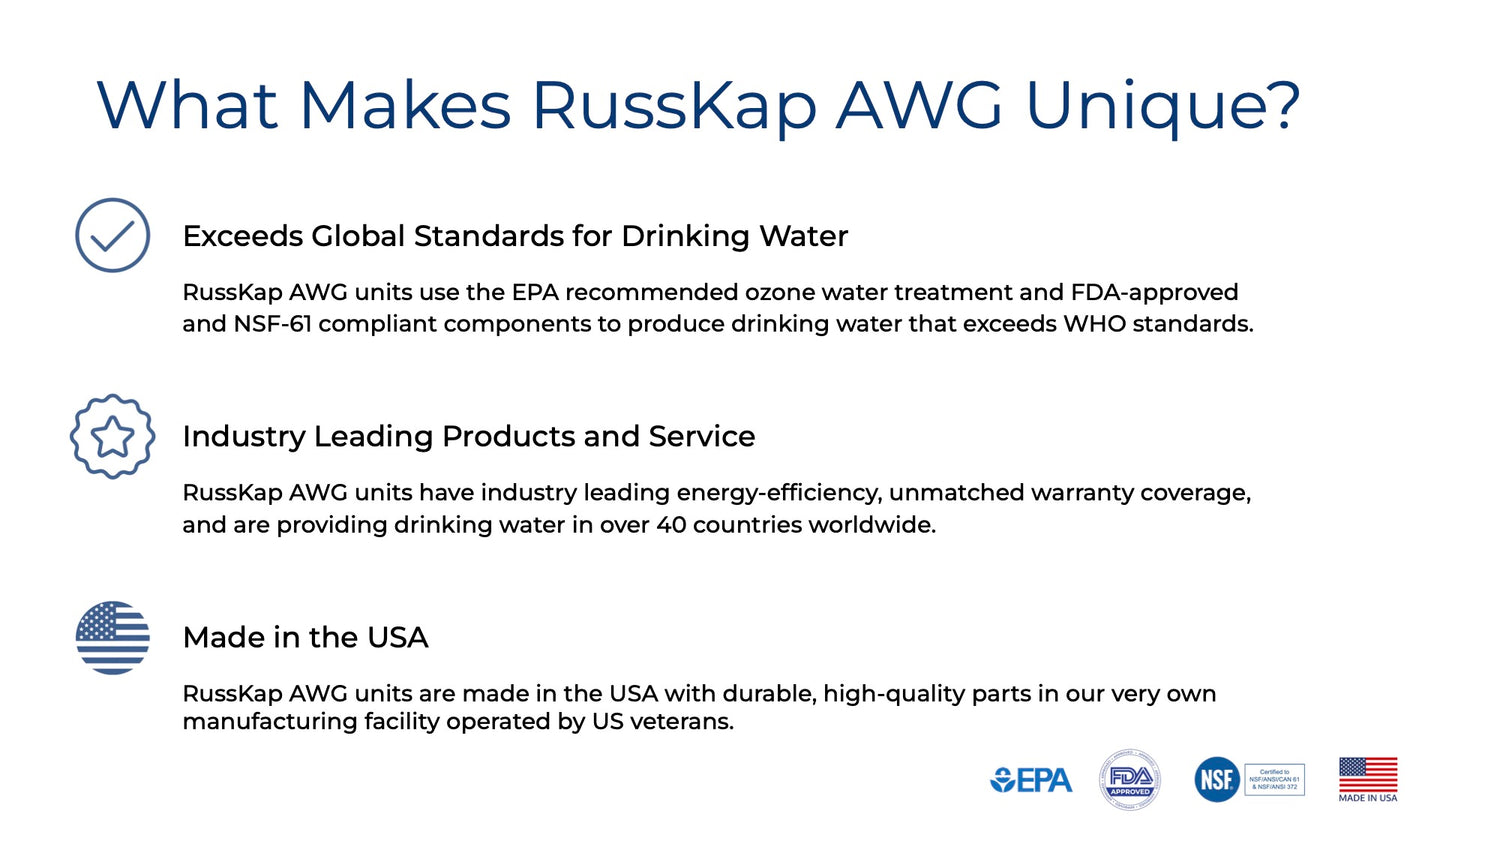 What Makes RussKap AWG Unique: exceeds global standards for drinking water, industry-leading product and service, made in USA by US veterans.